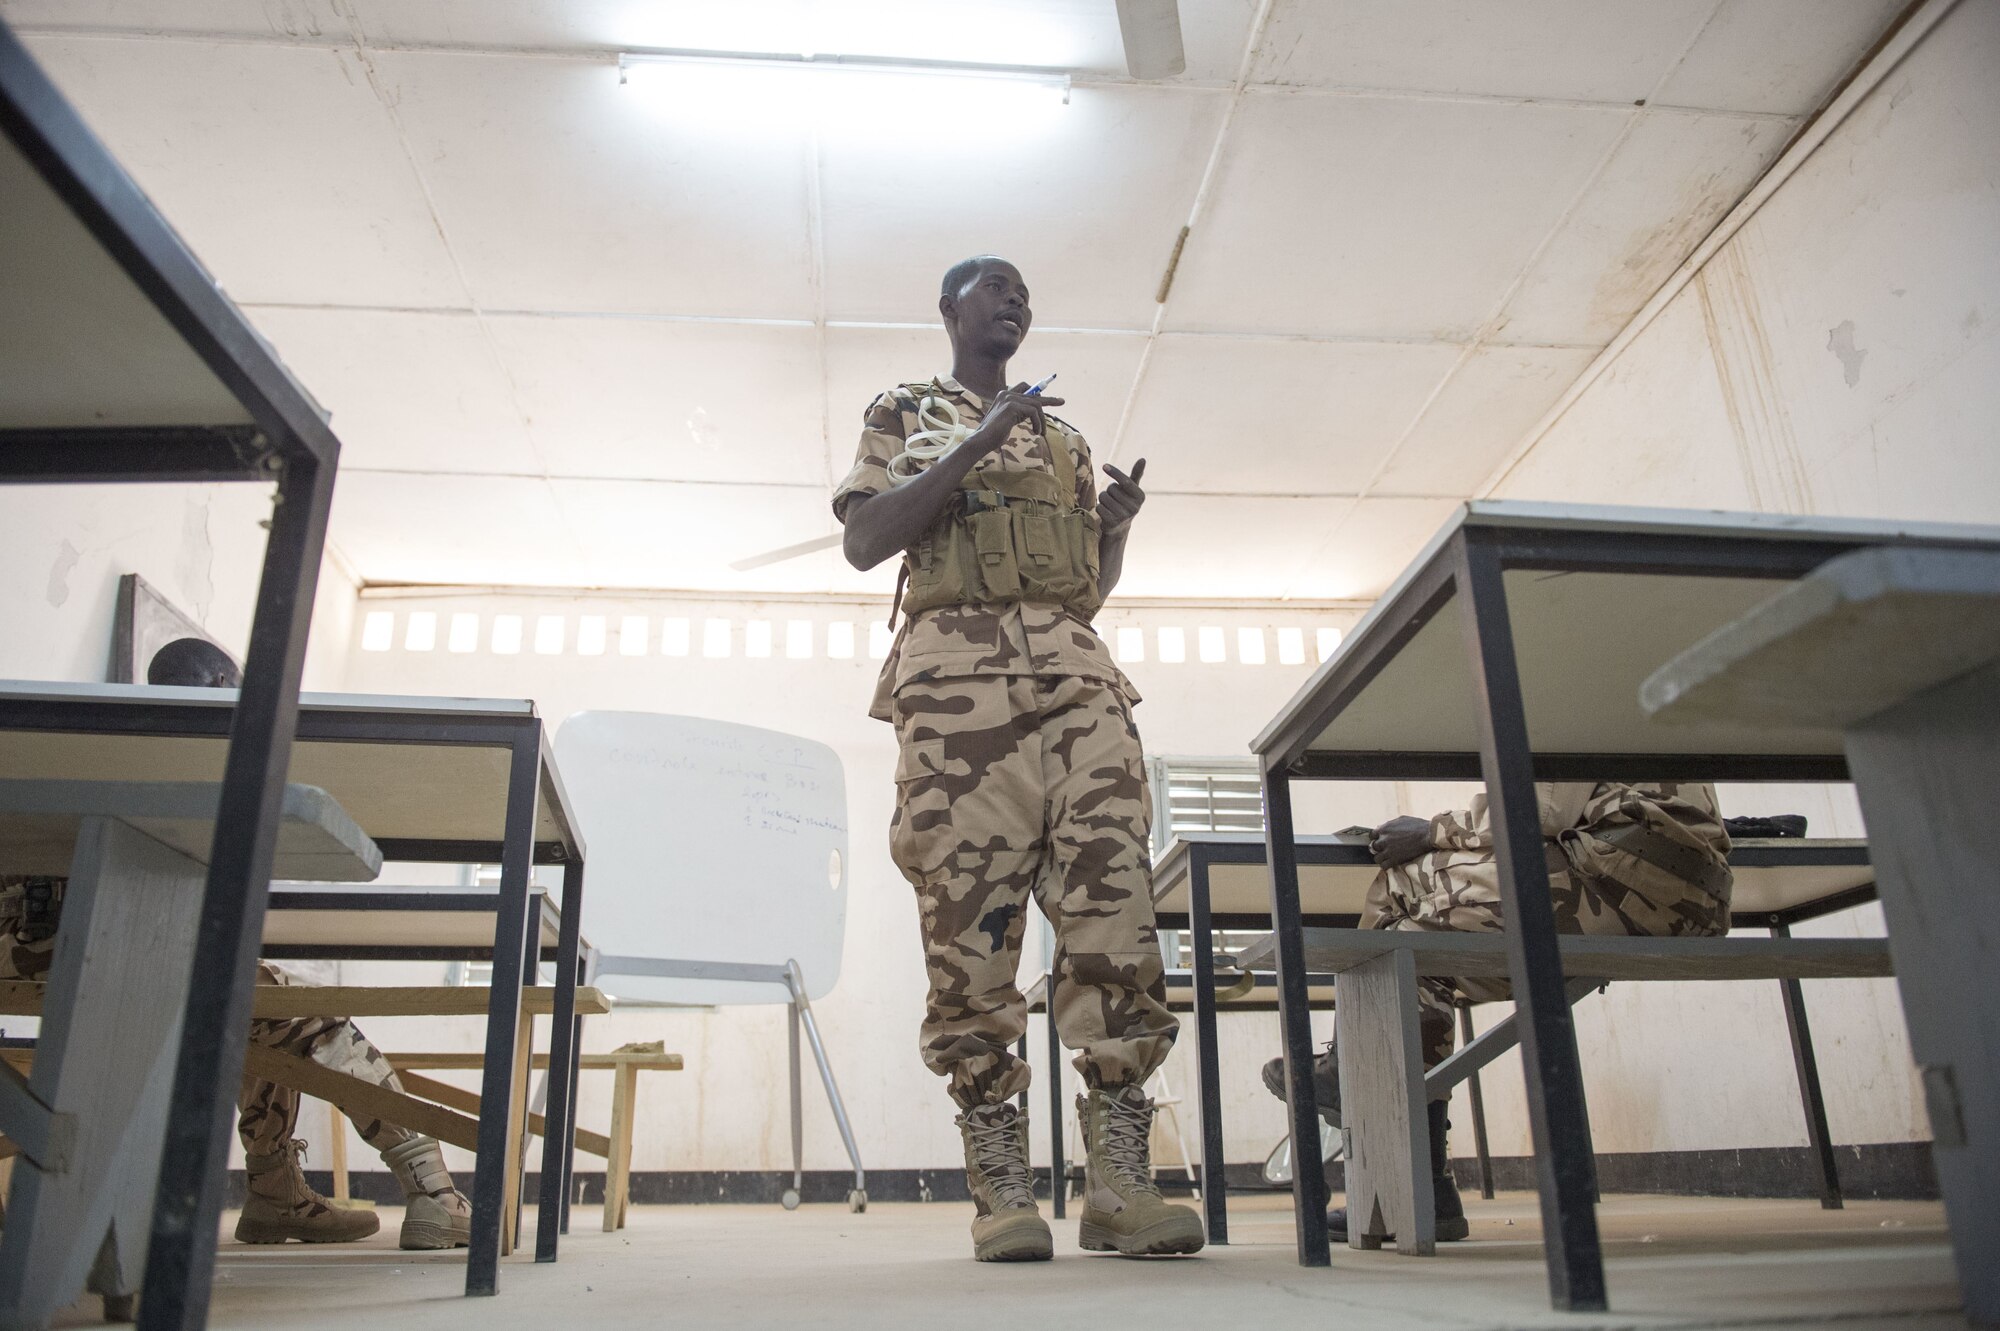 Chadian Air Force Adjudant Chef Issackha Babour, security anti-terrorism student, instructs a class on security procedures during held by the 818th Mobility Support Advisory Squadron as part of a mobile training team event at Adjikossei Air Base, N'Djamena, Chad, January 15, 2018.